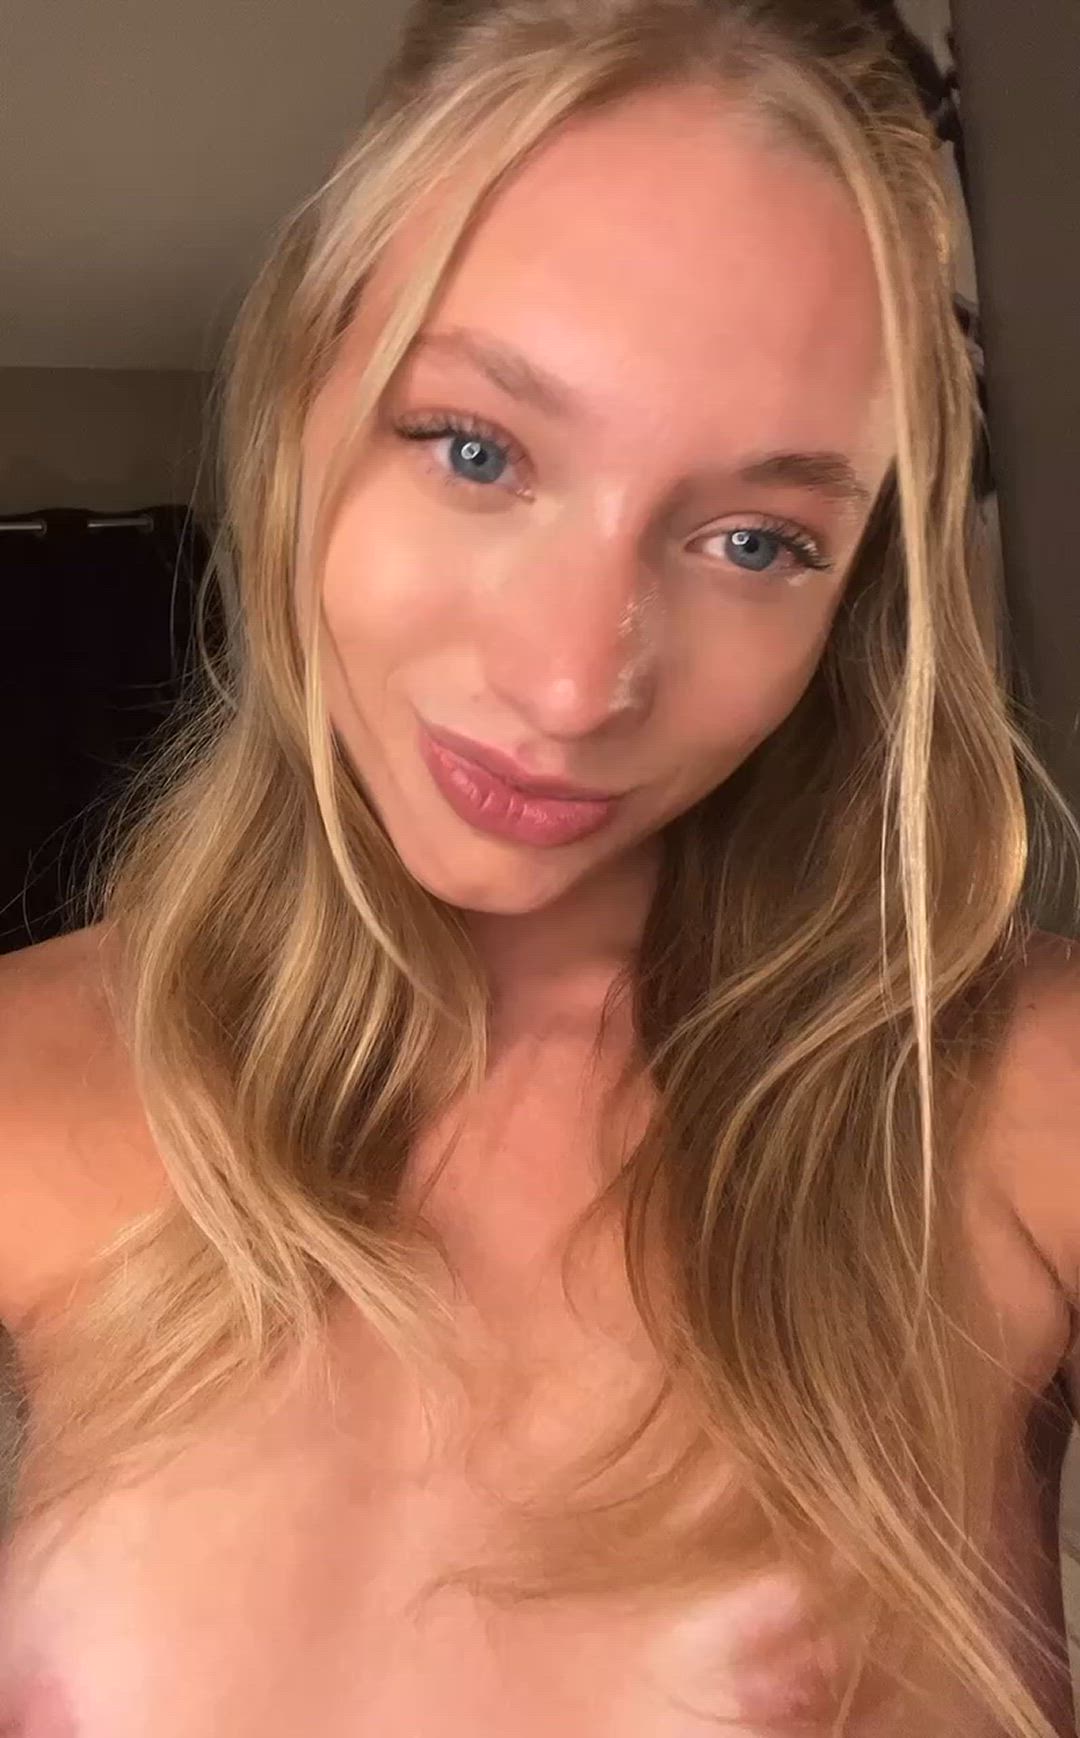 Tits porn video with onlyfans model Kaitlyn <strong>@kaitlynrose18</strong>